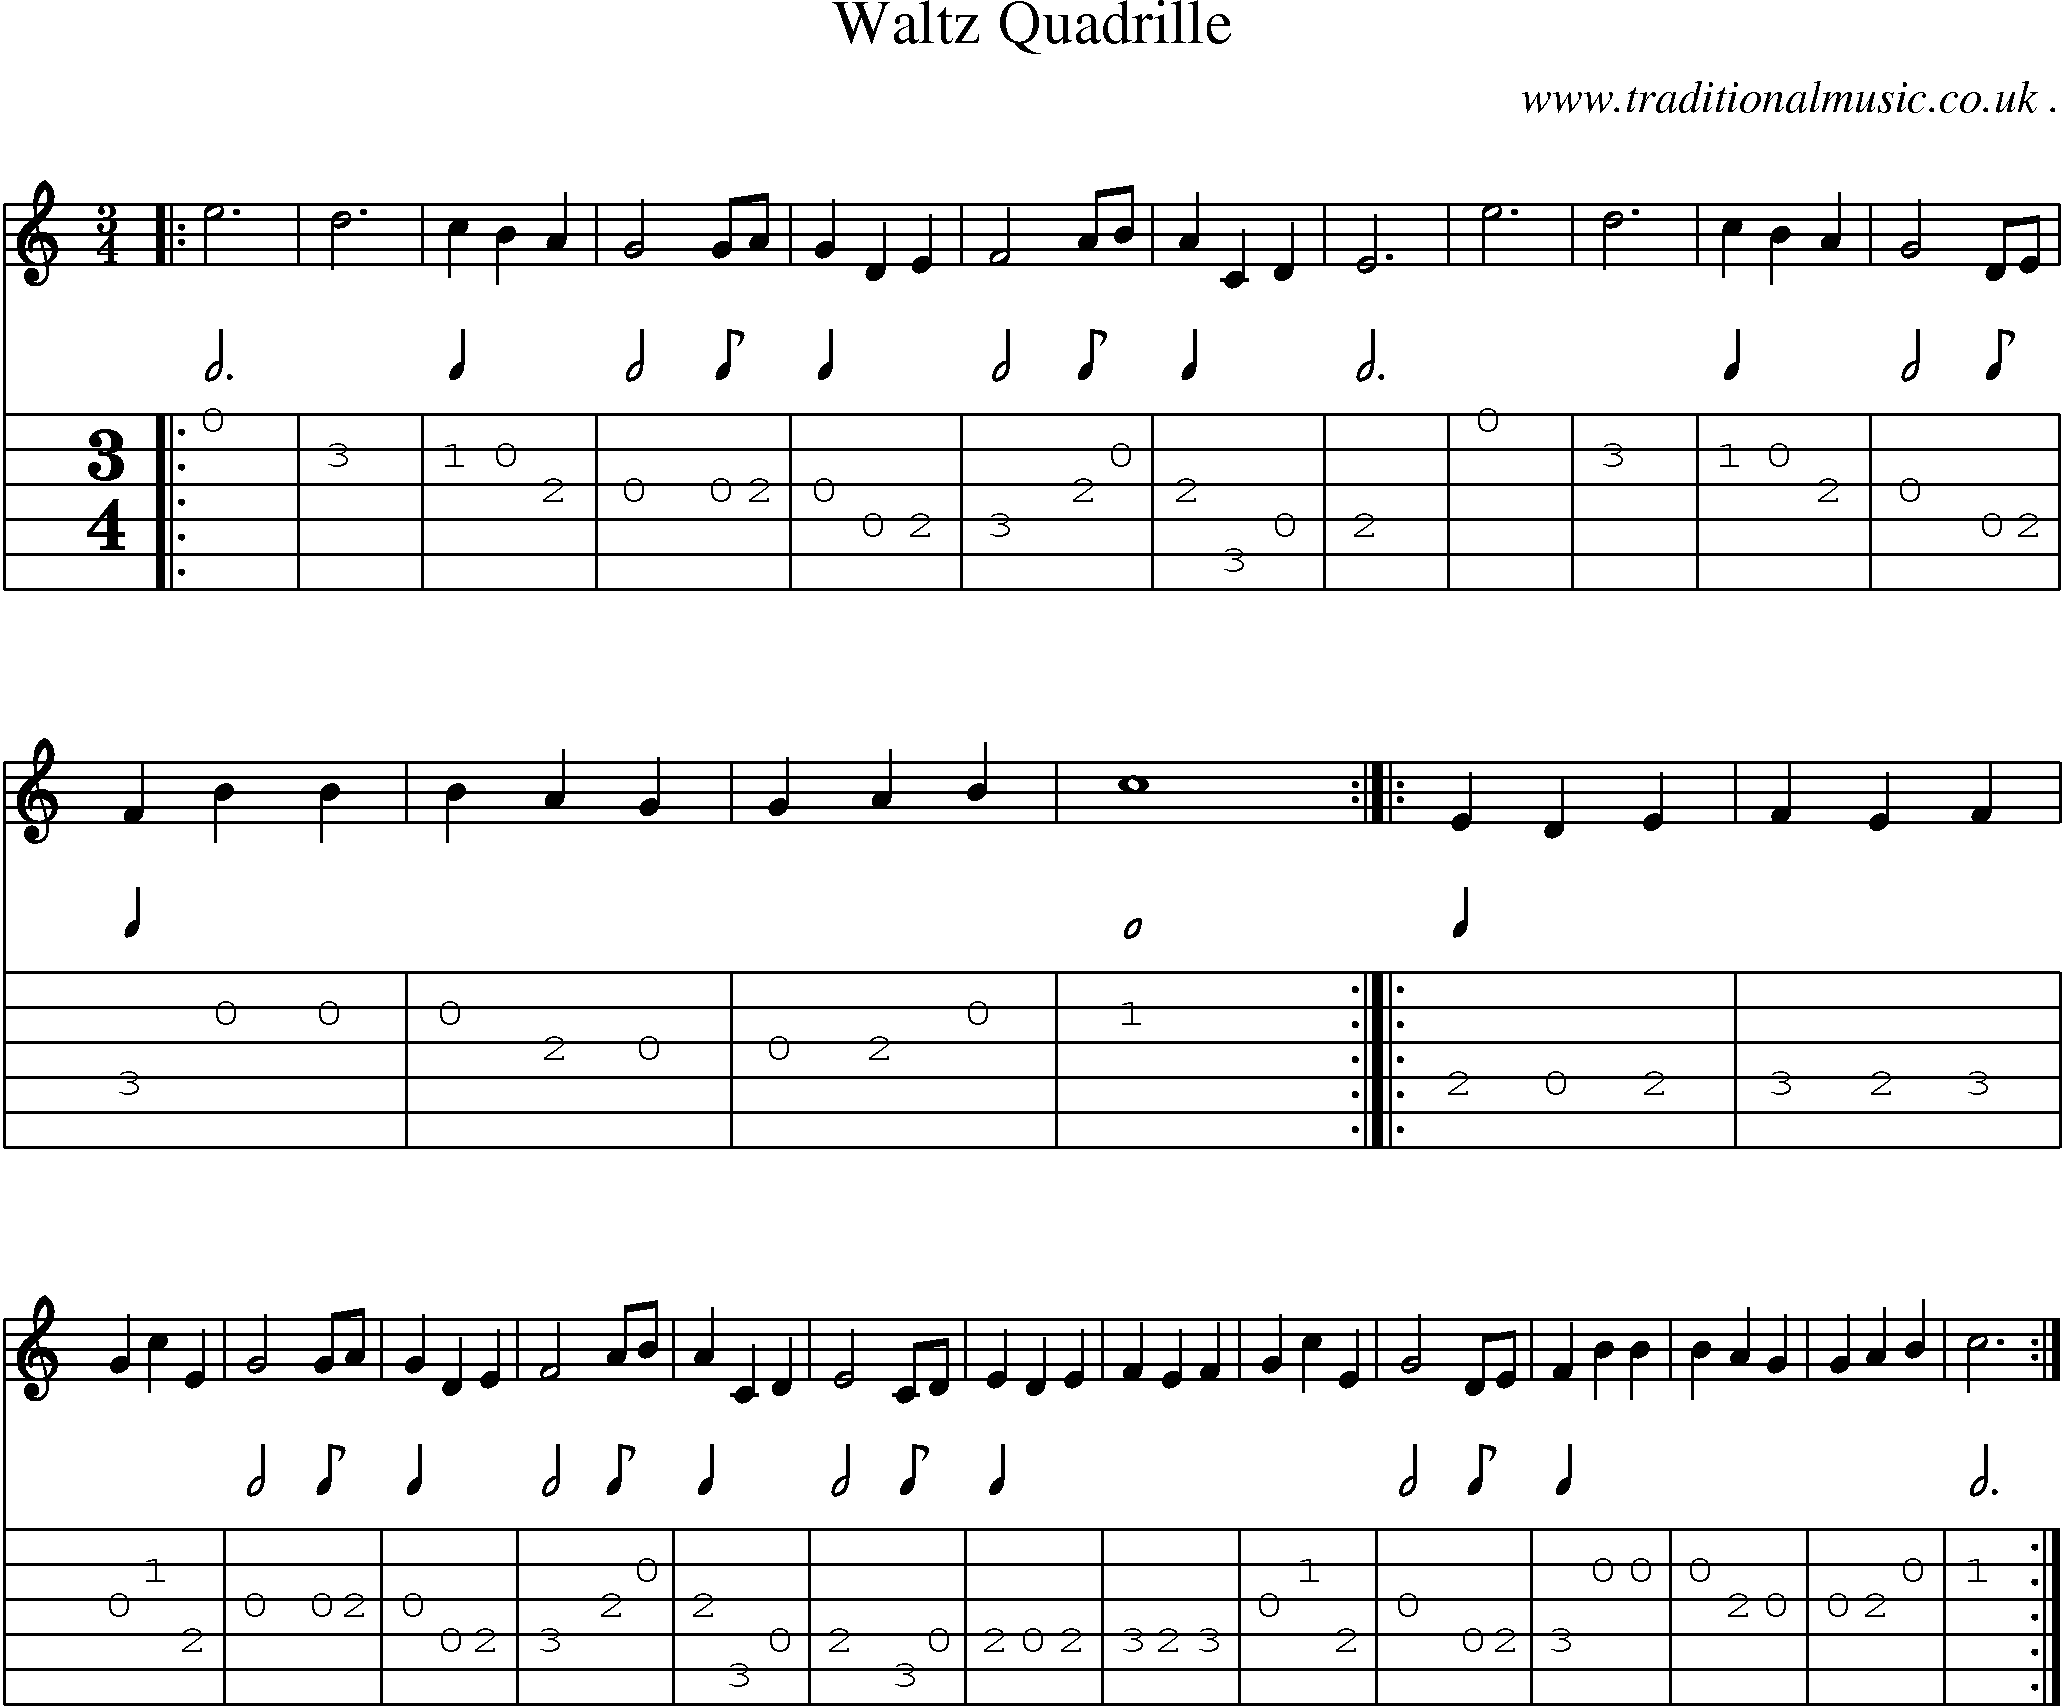 Music Score and Guitar Tabs for Waltz Quadrille